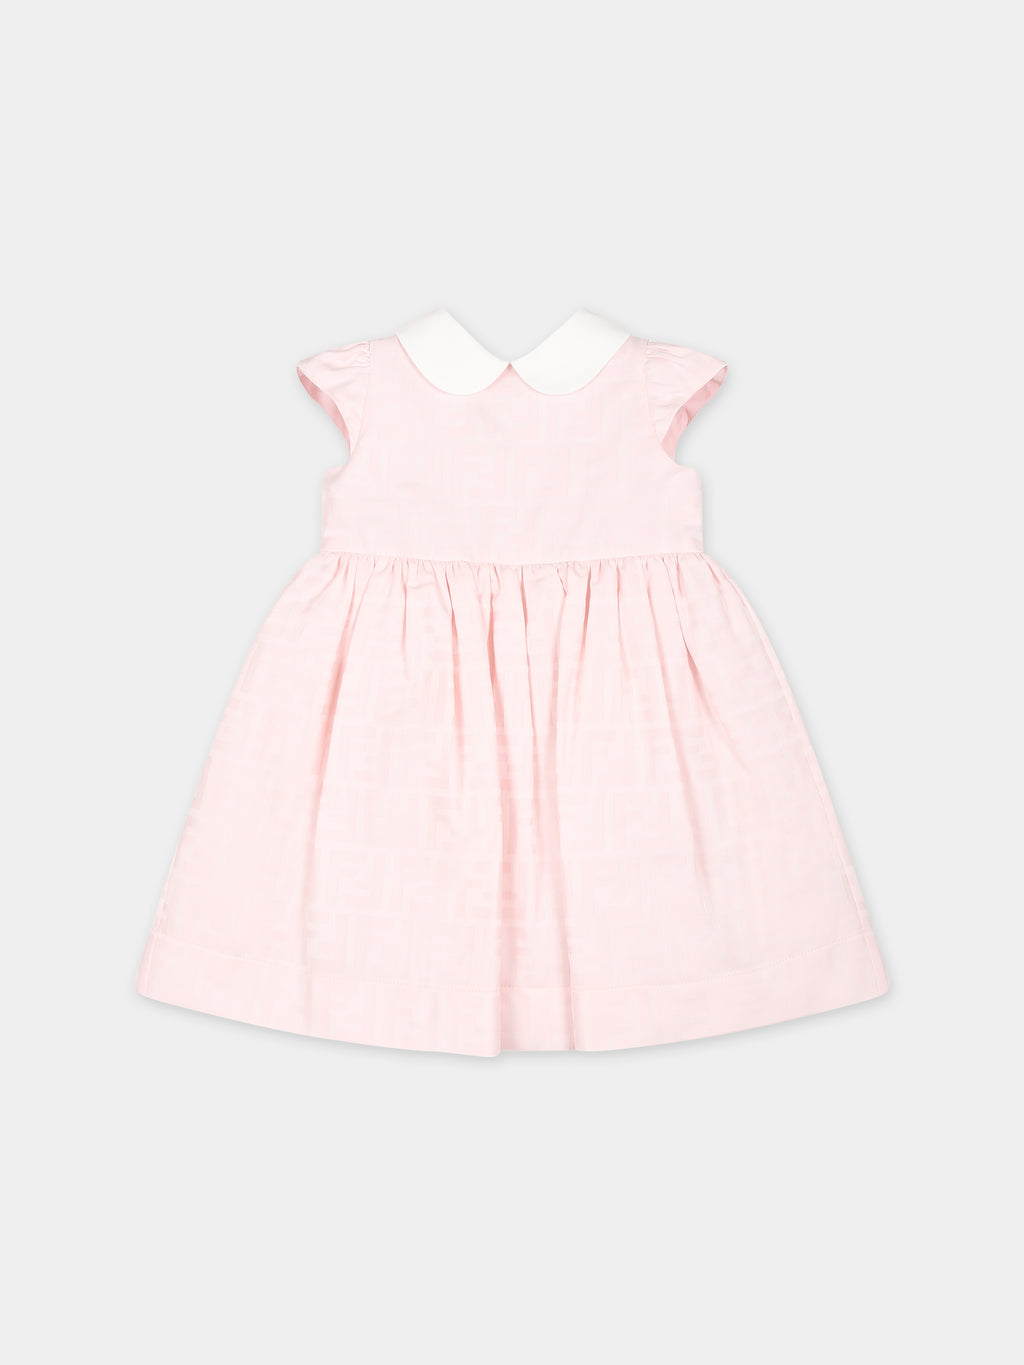 Pink dress for baby girl with double F